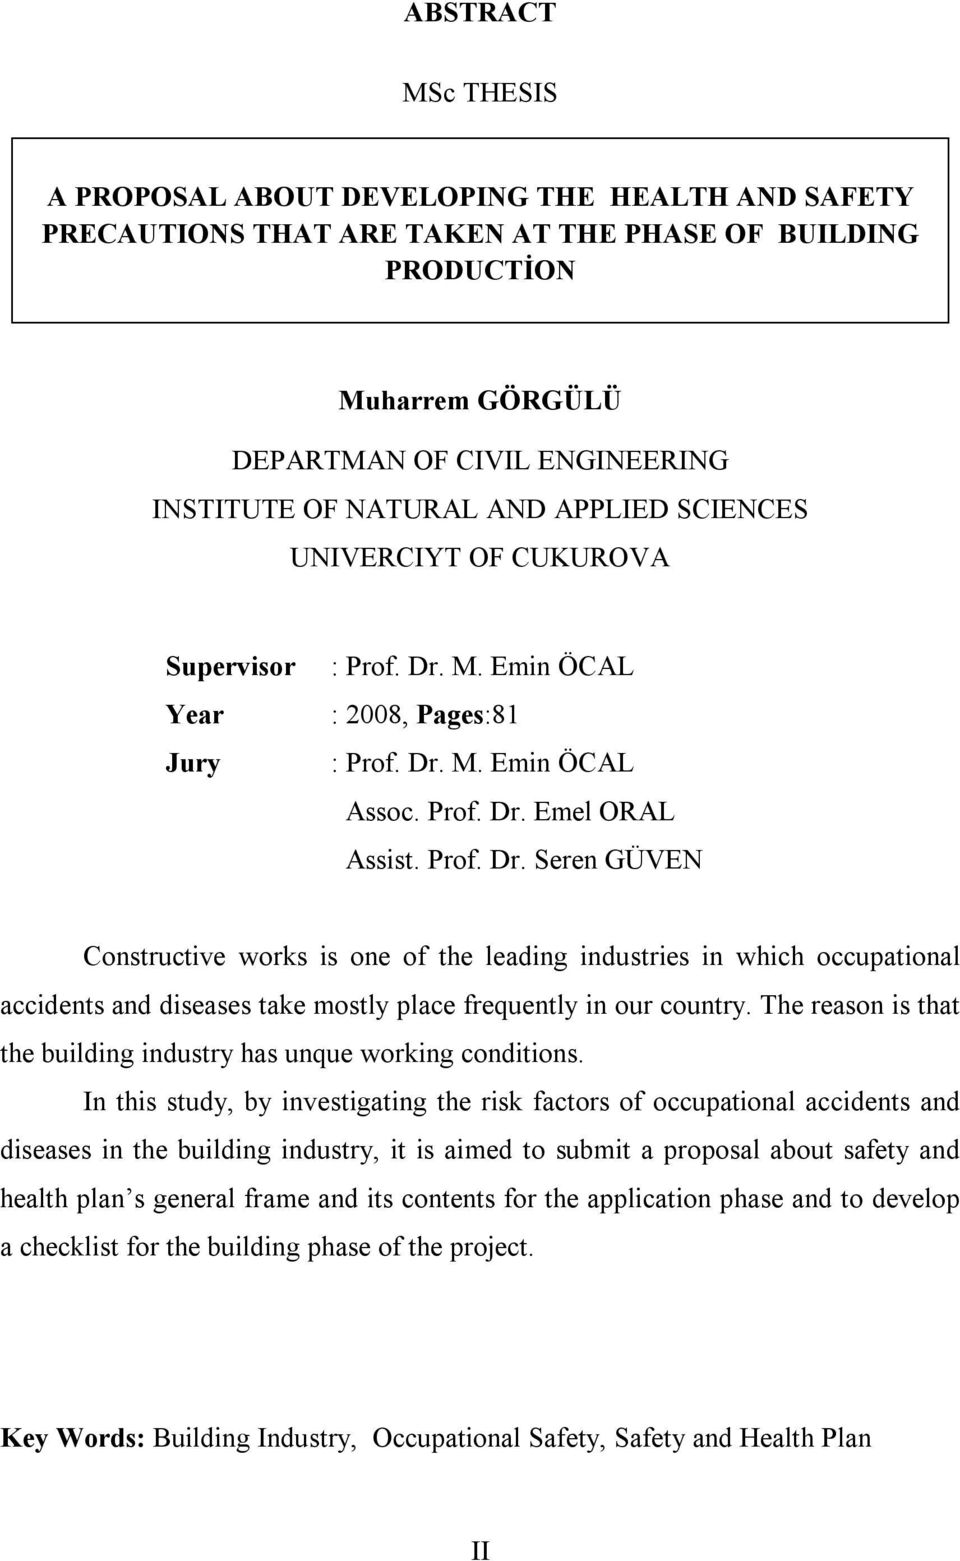 M. Emin ÖCAL : 2008, Pages:81 : Prof. Dr. M. Emin ÖCAL Assoc. Prof. Dr. Emel ORAL Assist. Prof. Dr. Seren GÜVEN Constructive works is one of the leading industries in which occupational accidents and diseases take mostly place frequently in our country.